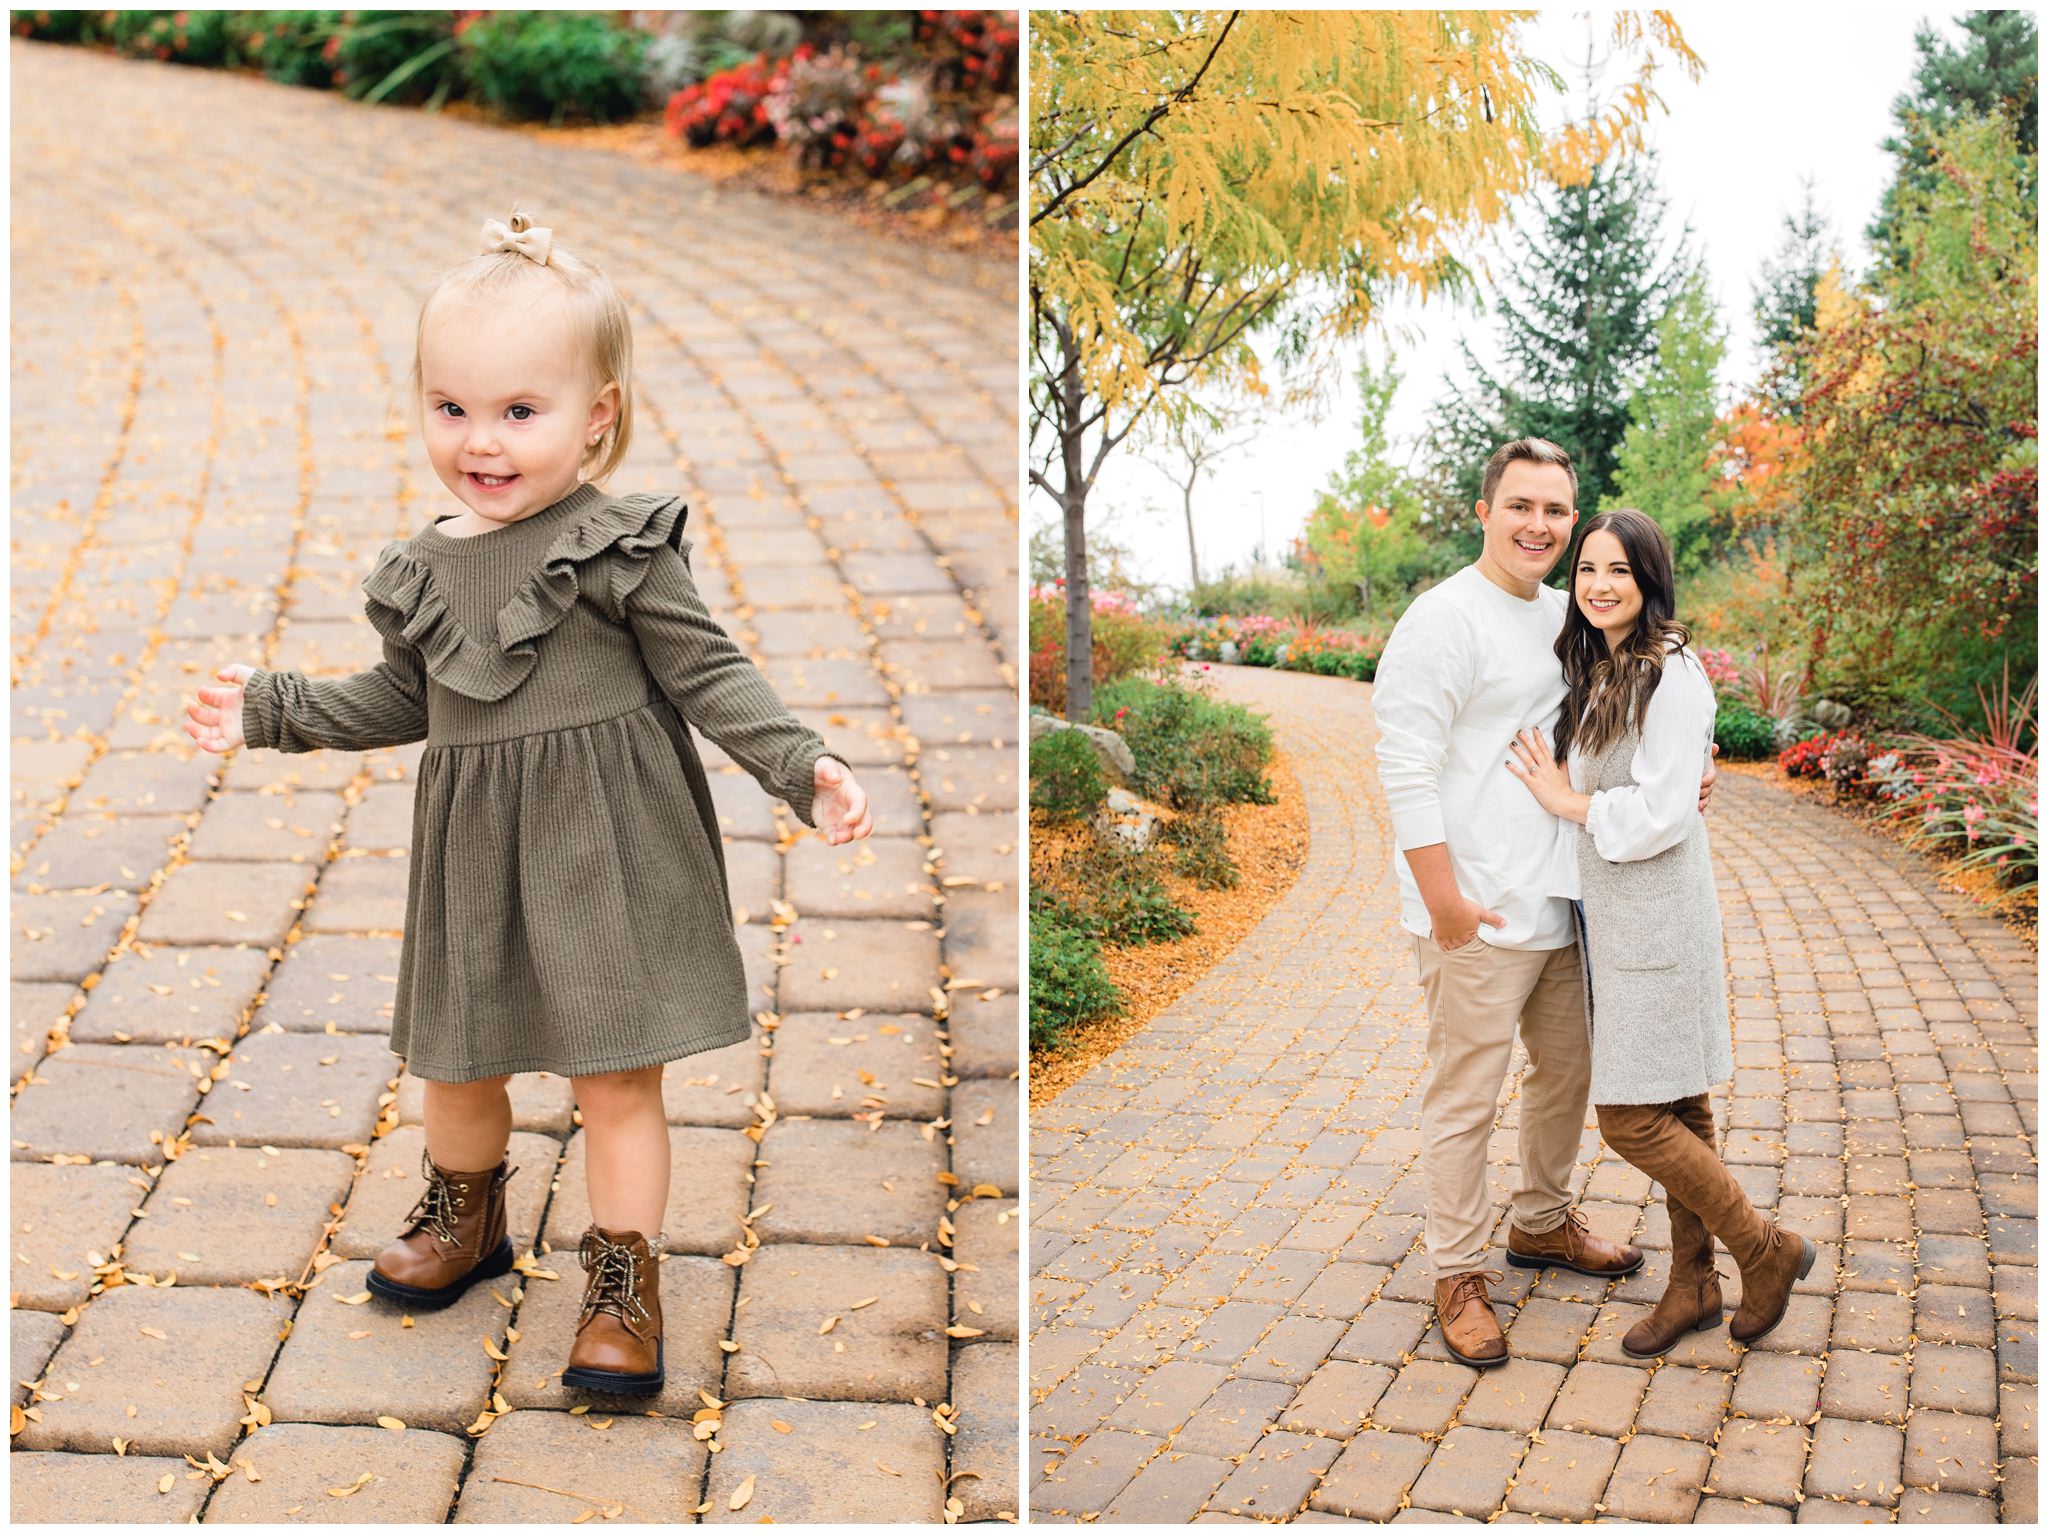 Cute extended family pictures in the fall